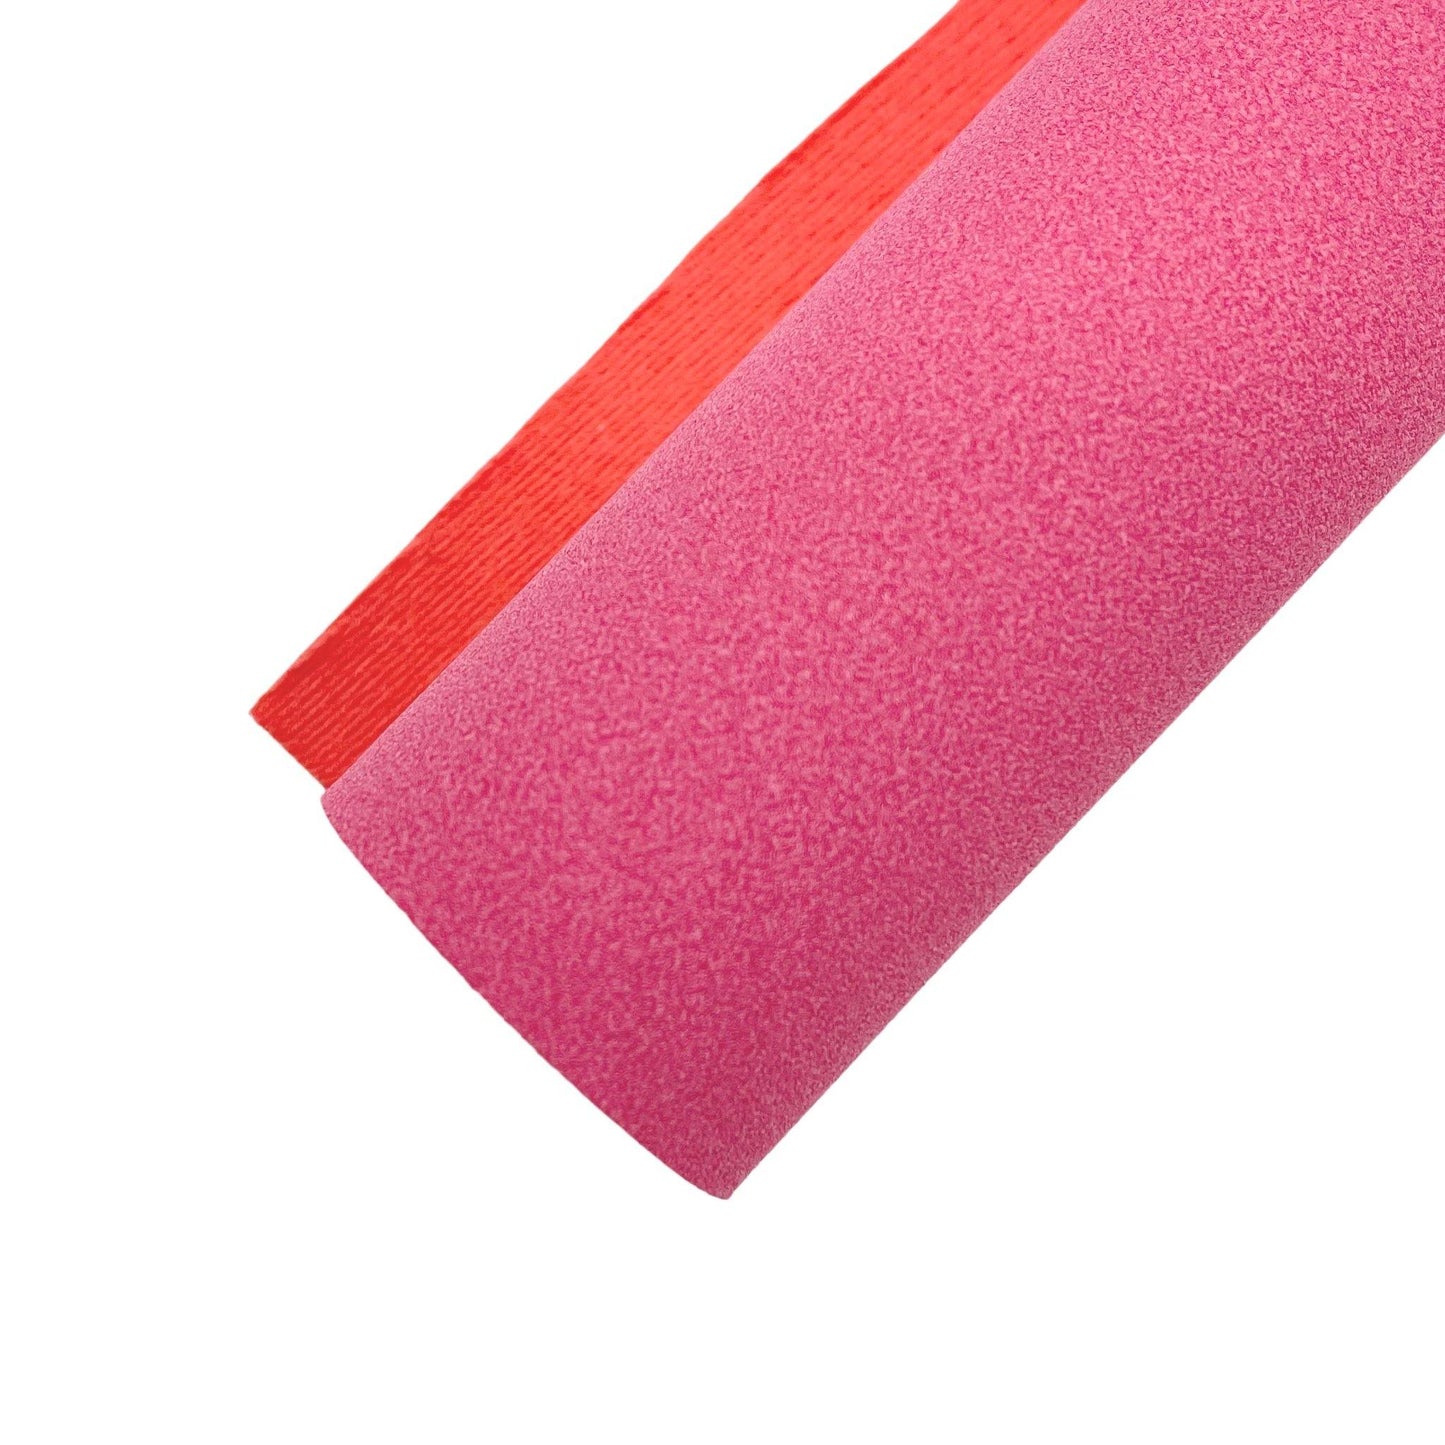 SMOOTH Faux Suede Fabric Sheets - Pretty in Pink Supply